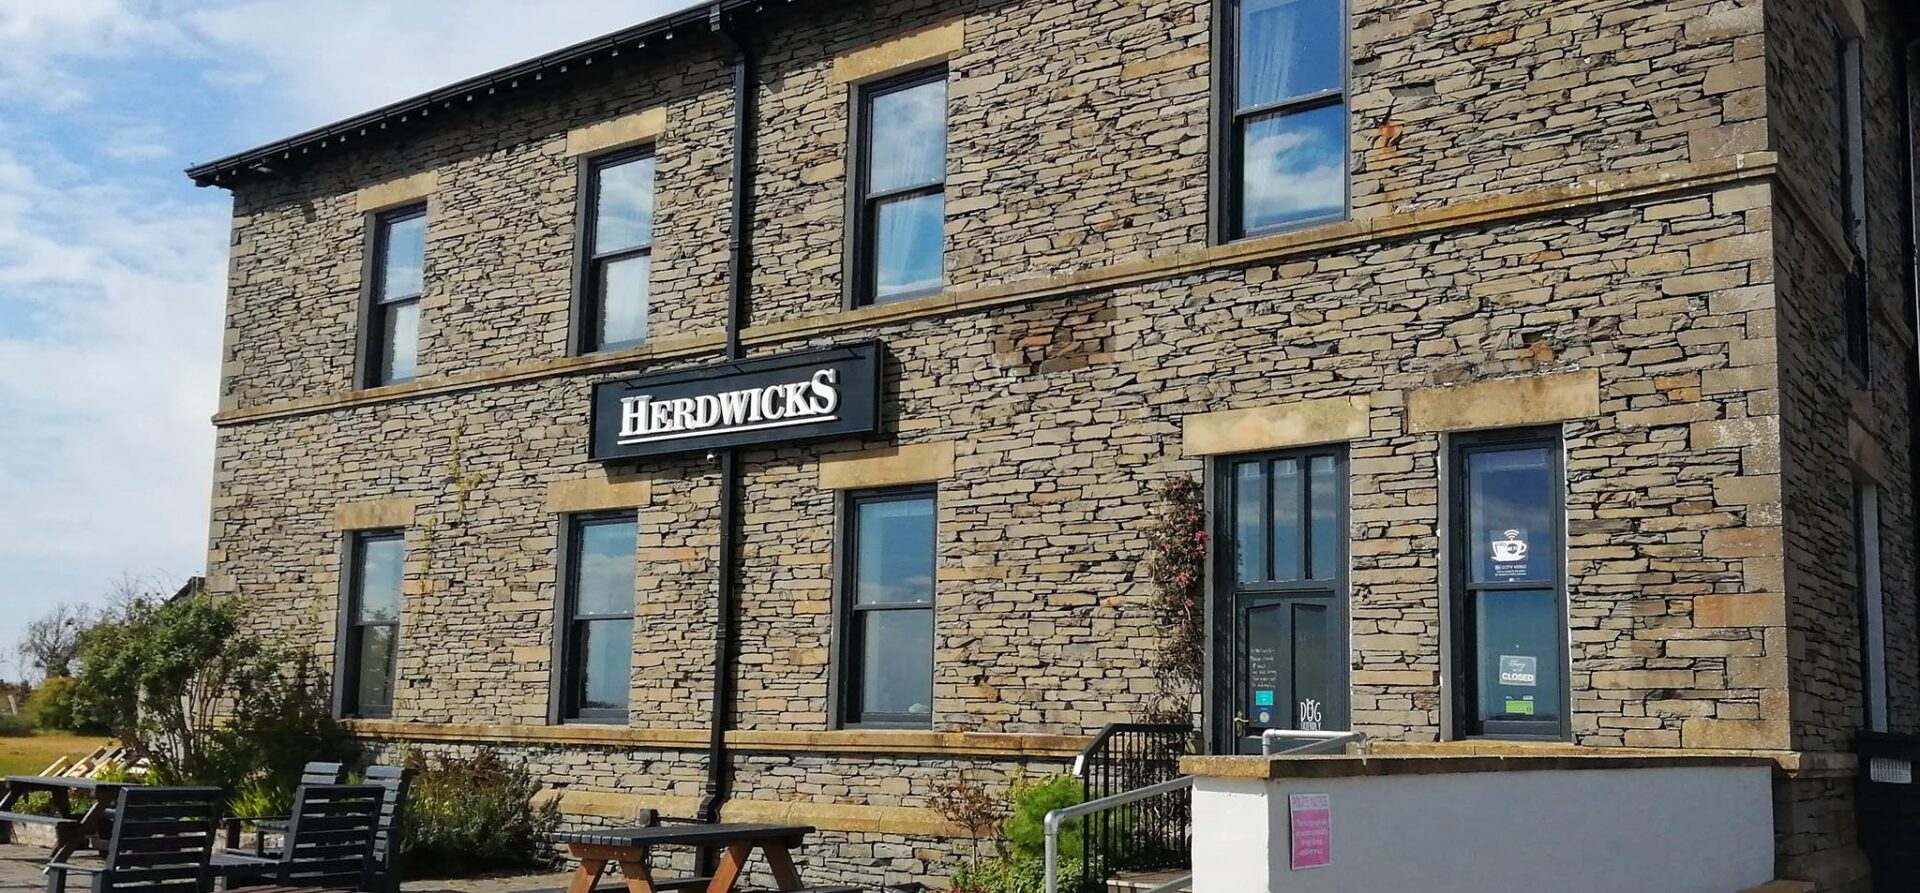 herdwicks-boutique-hotel-luxury-affordable-cumbria-lakes-trip-holiday-stay-accommodation